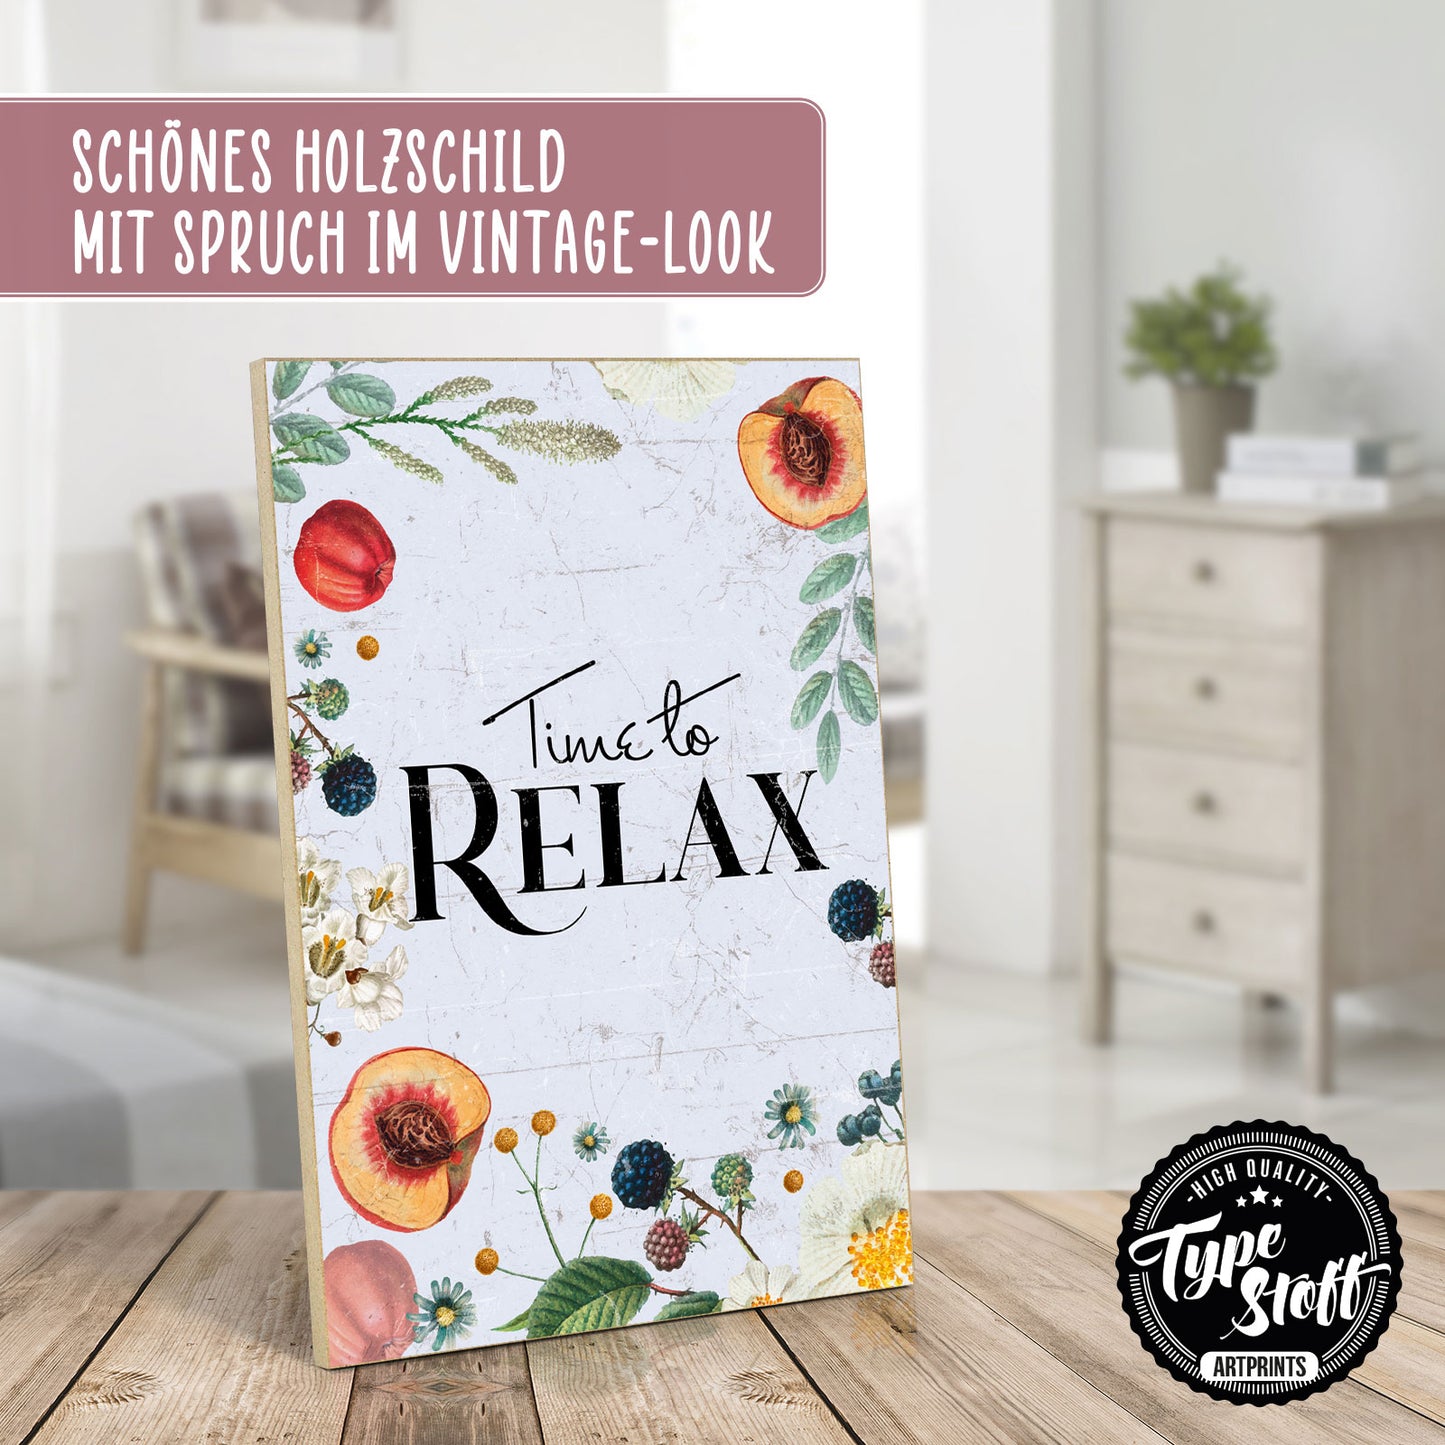 Holzschild mit Spruch - Hygge - Time to relax – HS-GH-01052